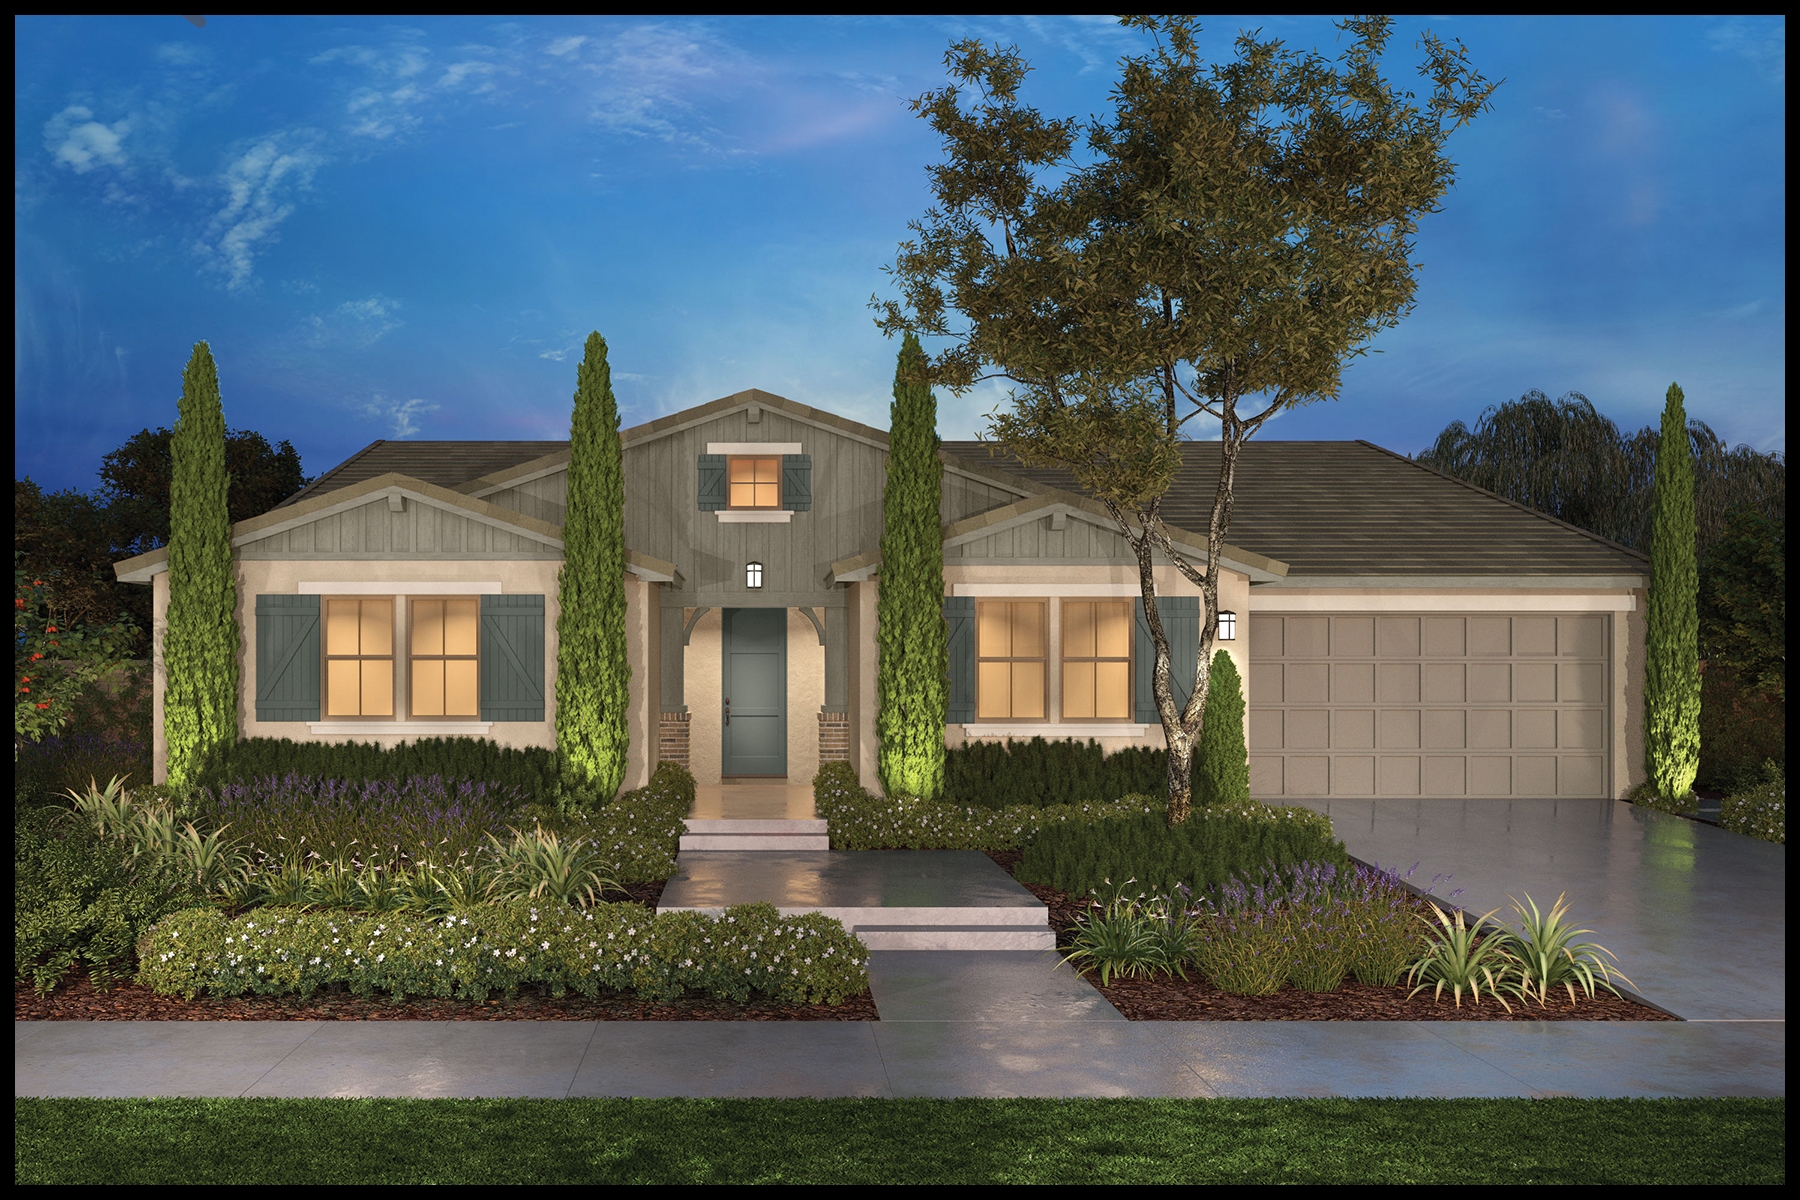 Model Grand Opening For Province At Au Murphy Ranch This Saturday April 30th – Orange County Register